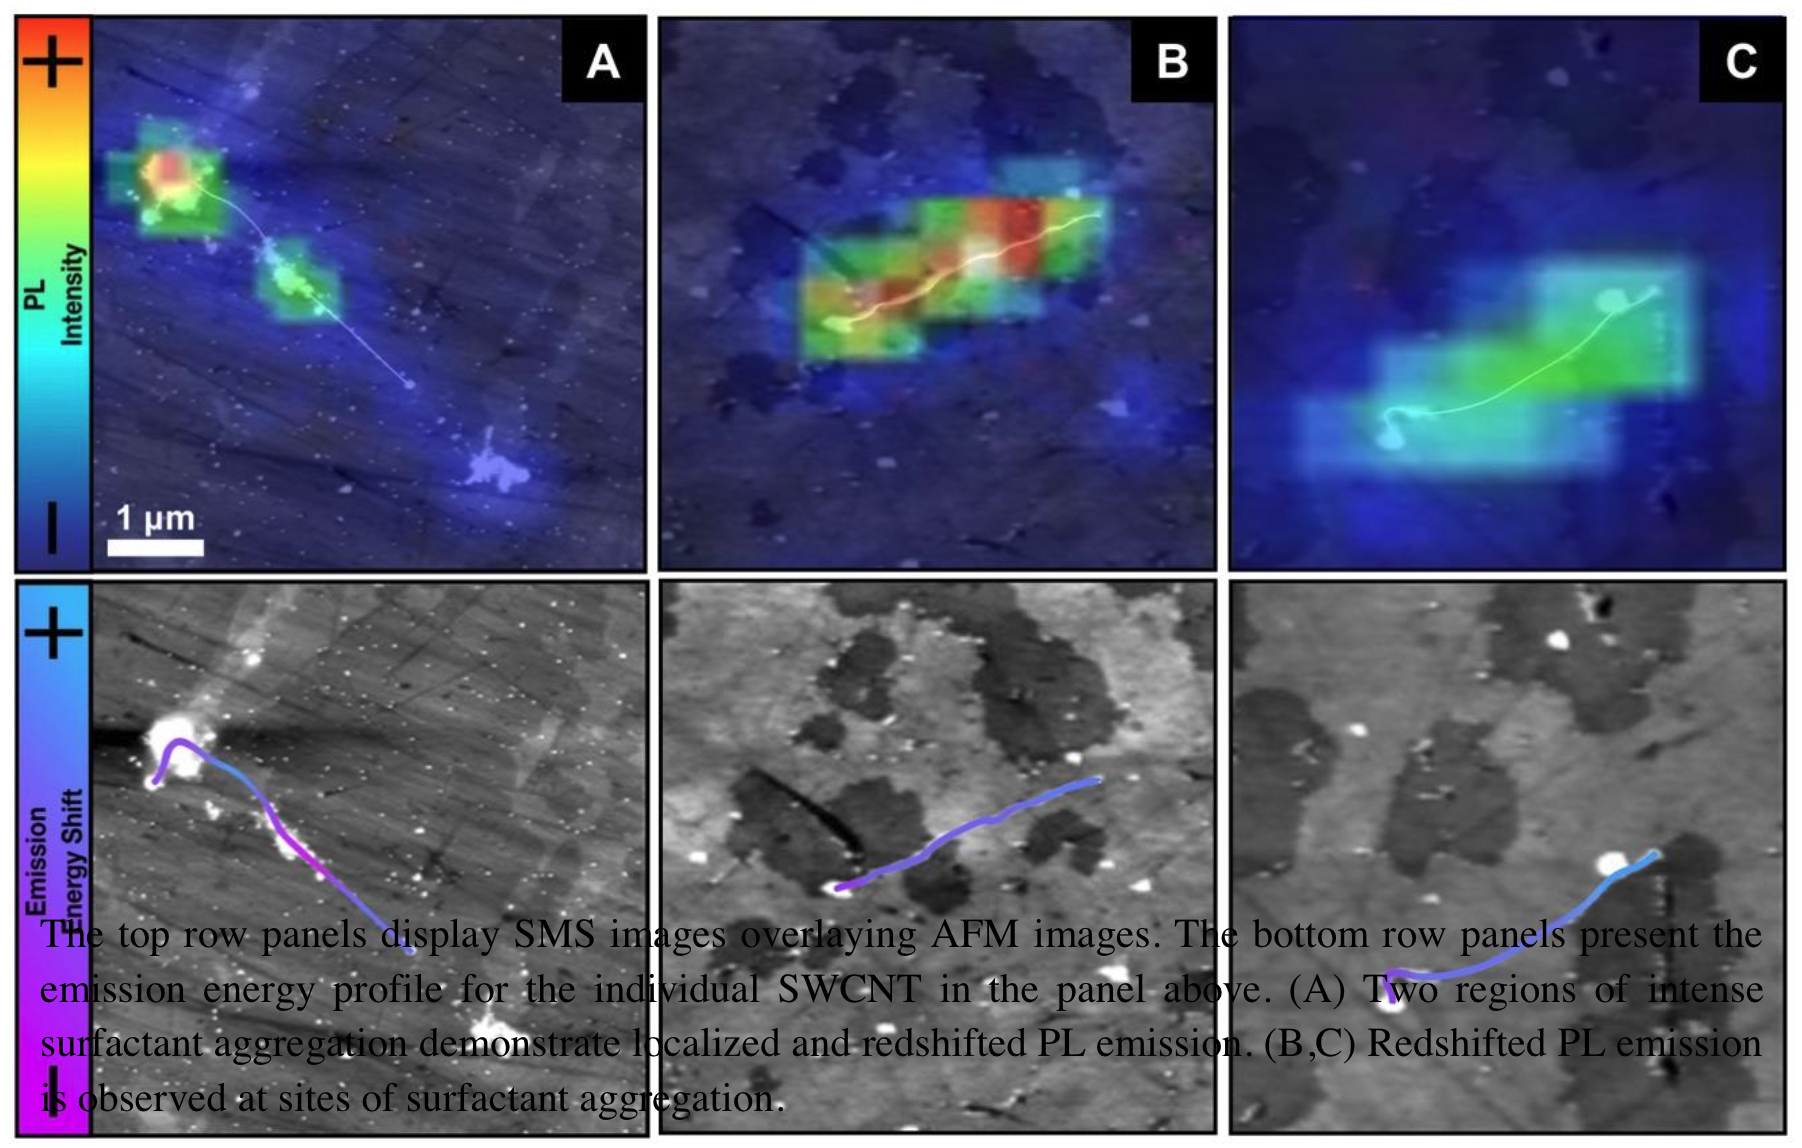 The top row panels display  SMS images  overlaying AFM images. The bottom row panels present the emission energy profile for the individual SWCNT in the panel above. (A) Two regions of intense surfactant aggregation demonstrate localized and redshifted PL emission. (B,C) Redshifted PL emission is observed at sites of surfactant aggregation.